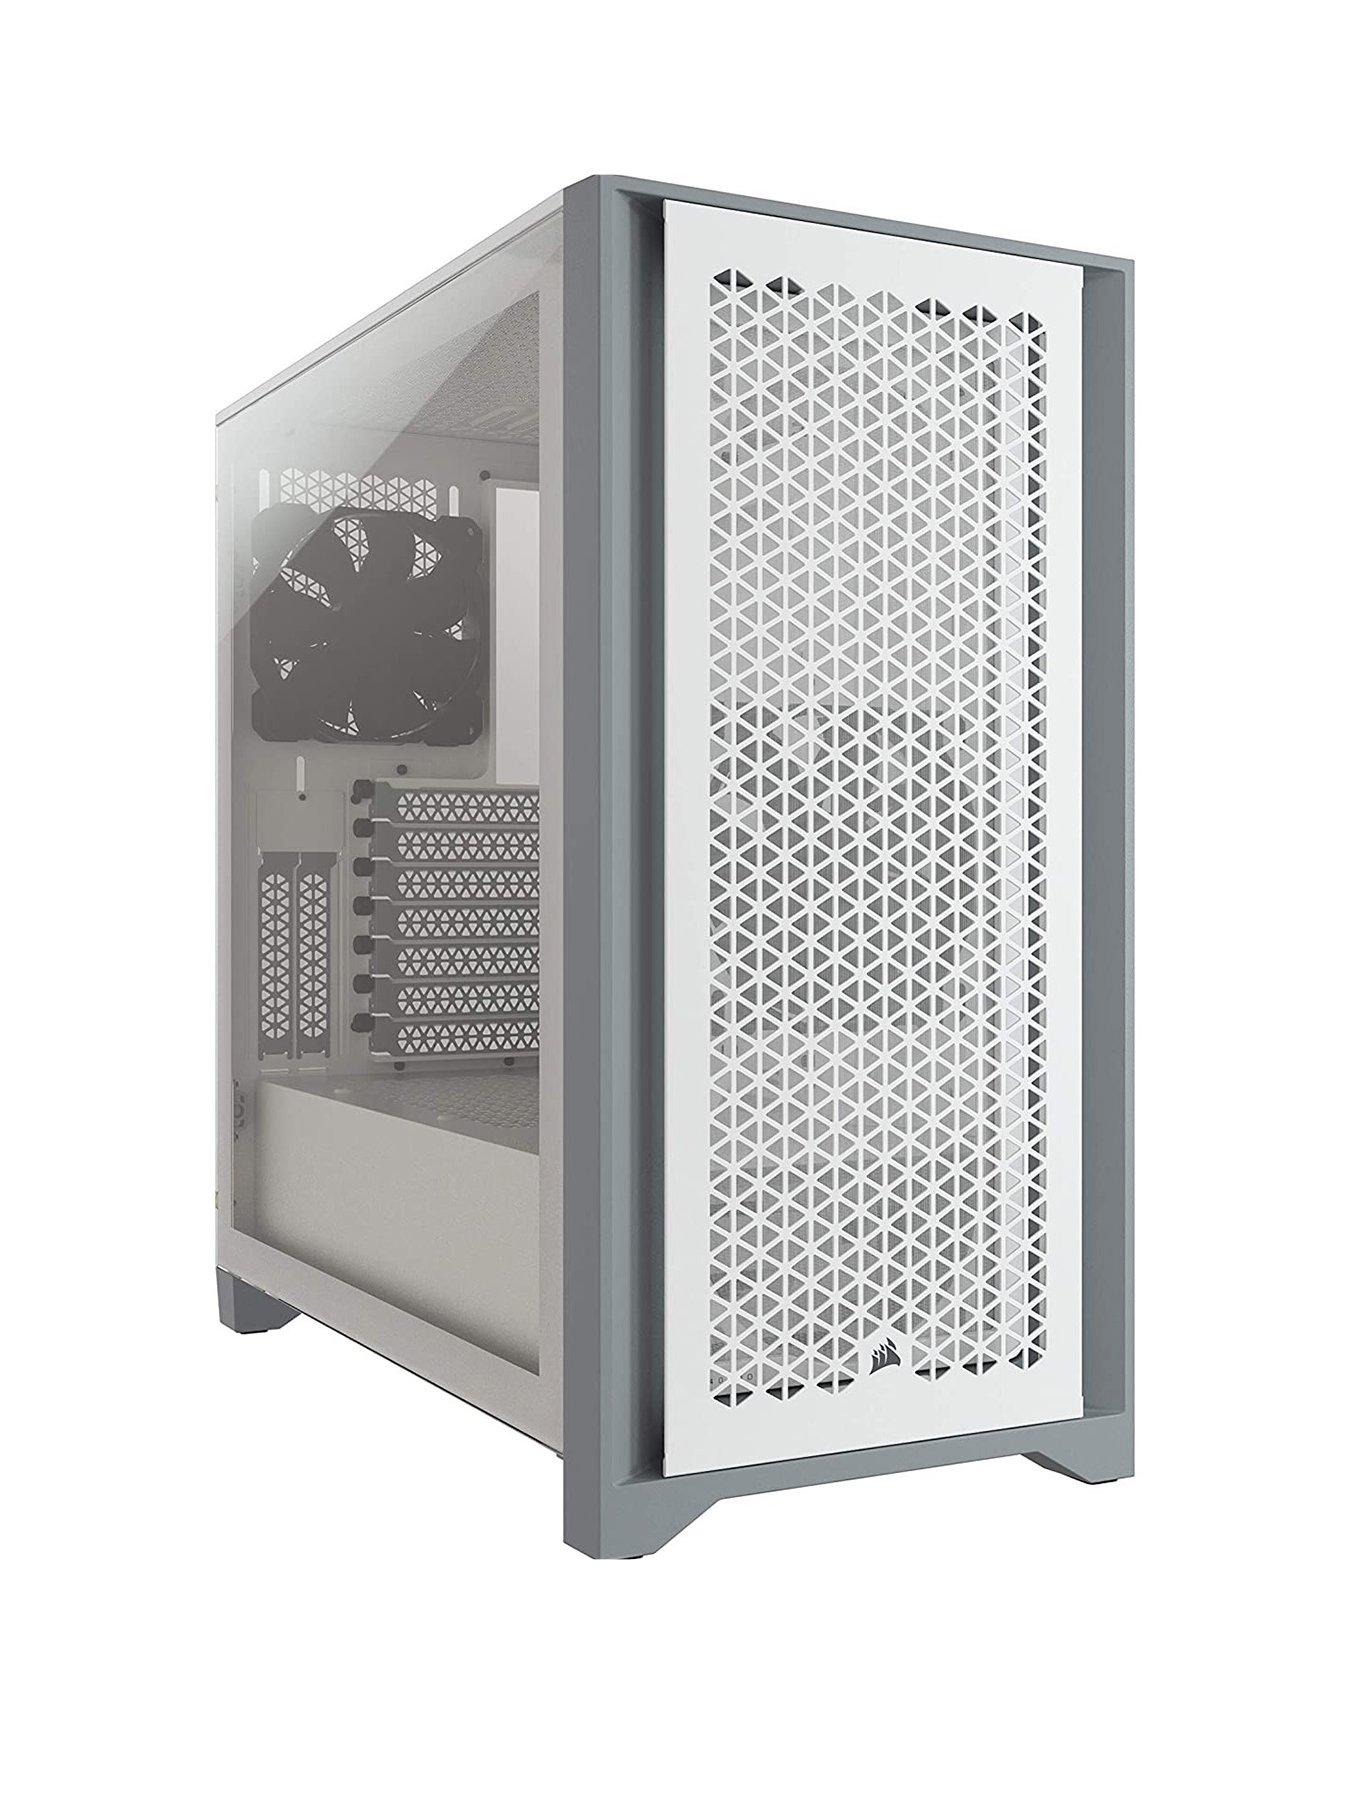 Grab Corsair's compact and thermally-efficient 3000D Airflow mid-size PC  case for £58